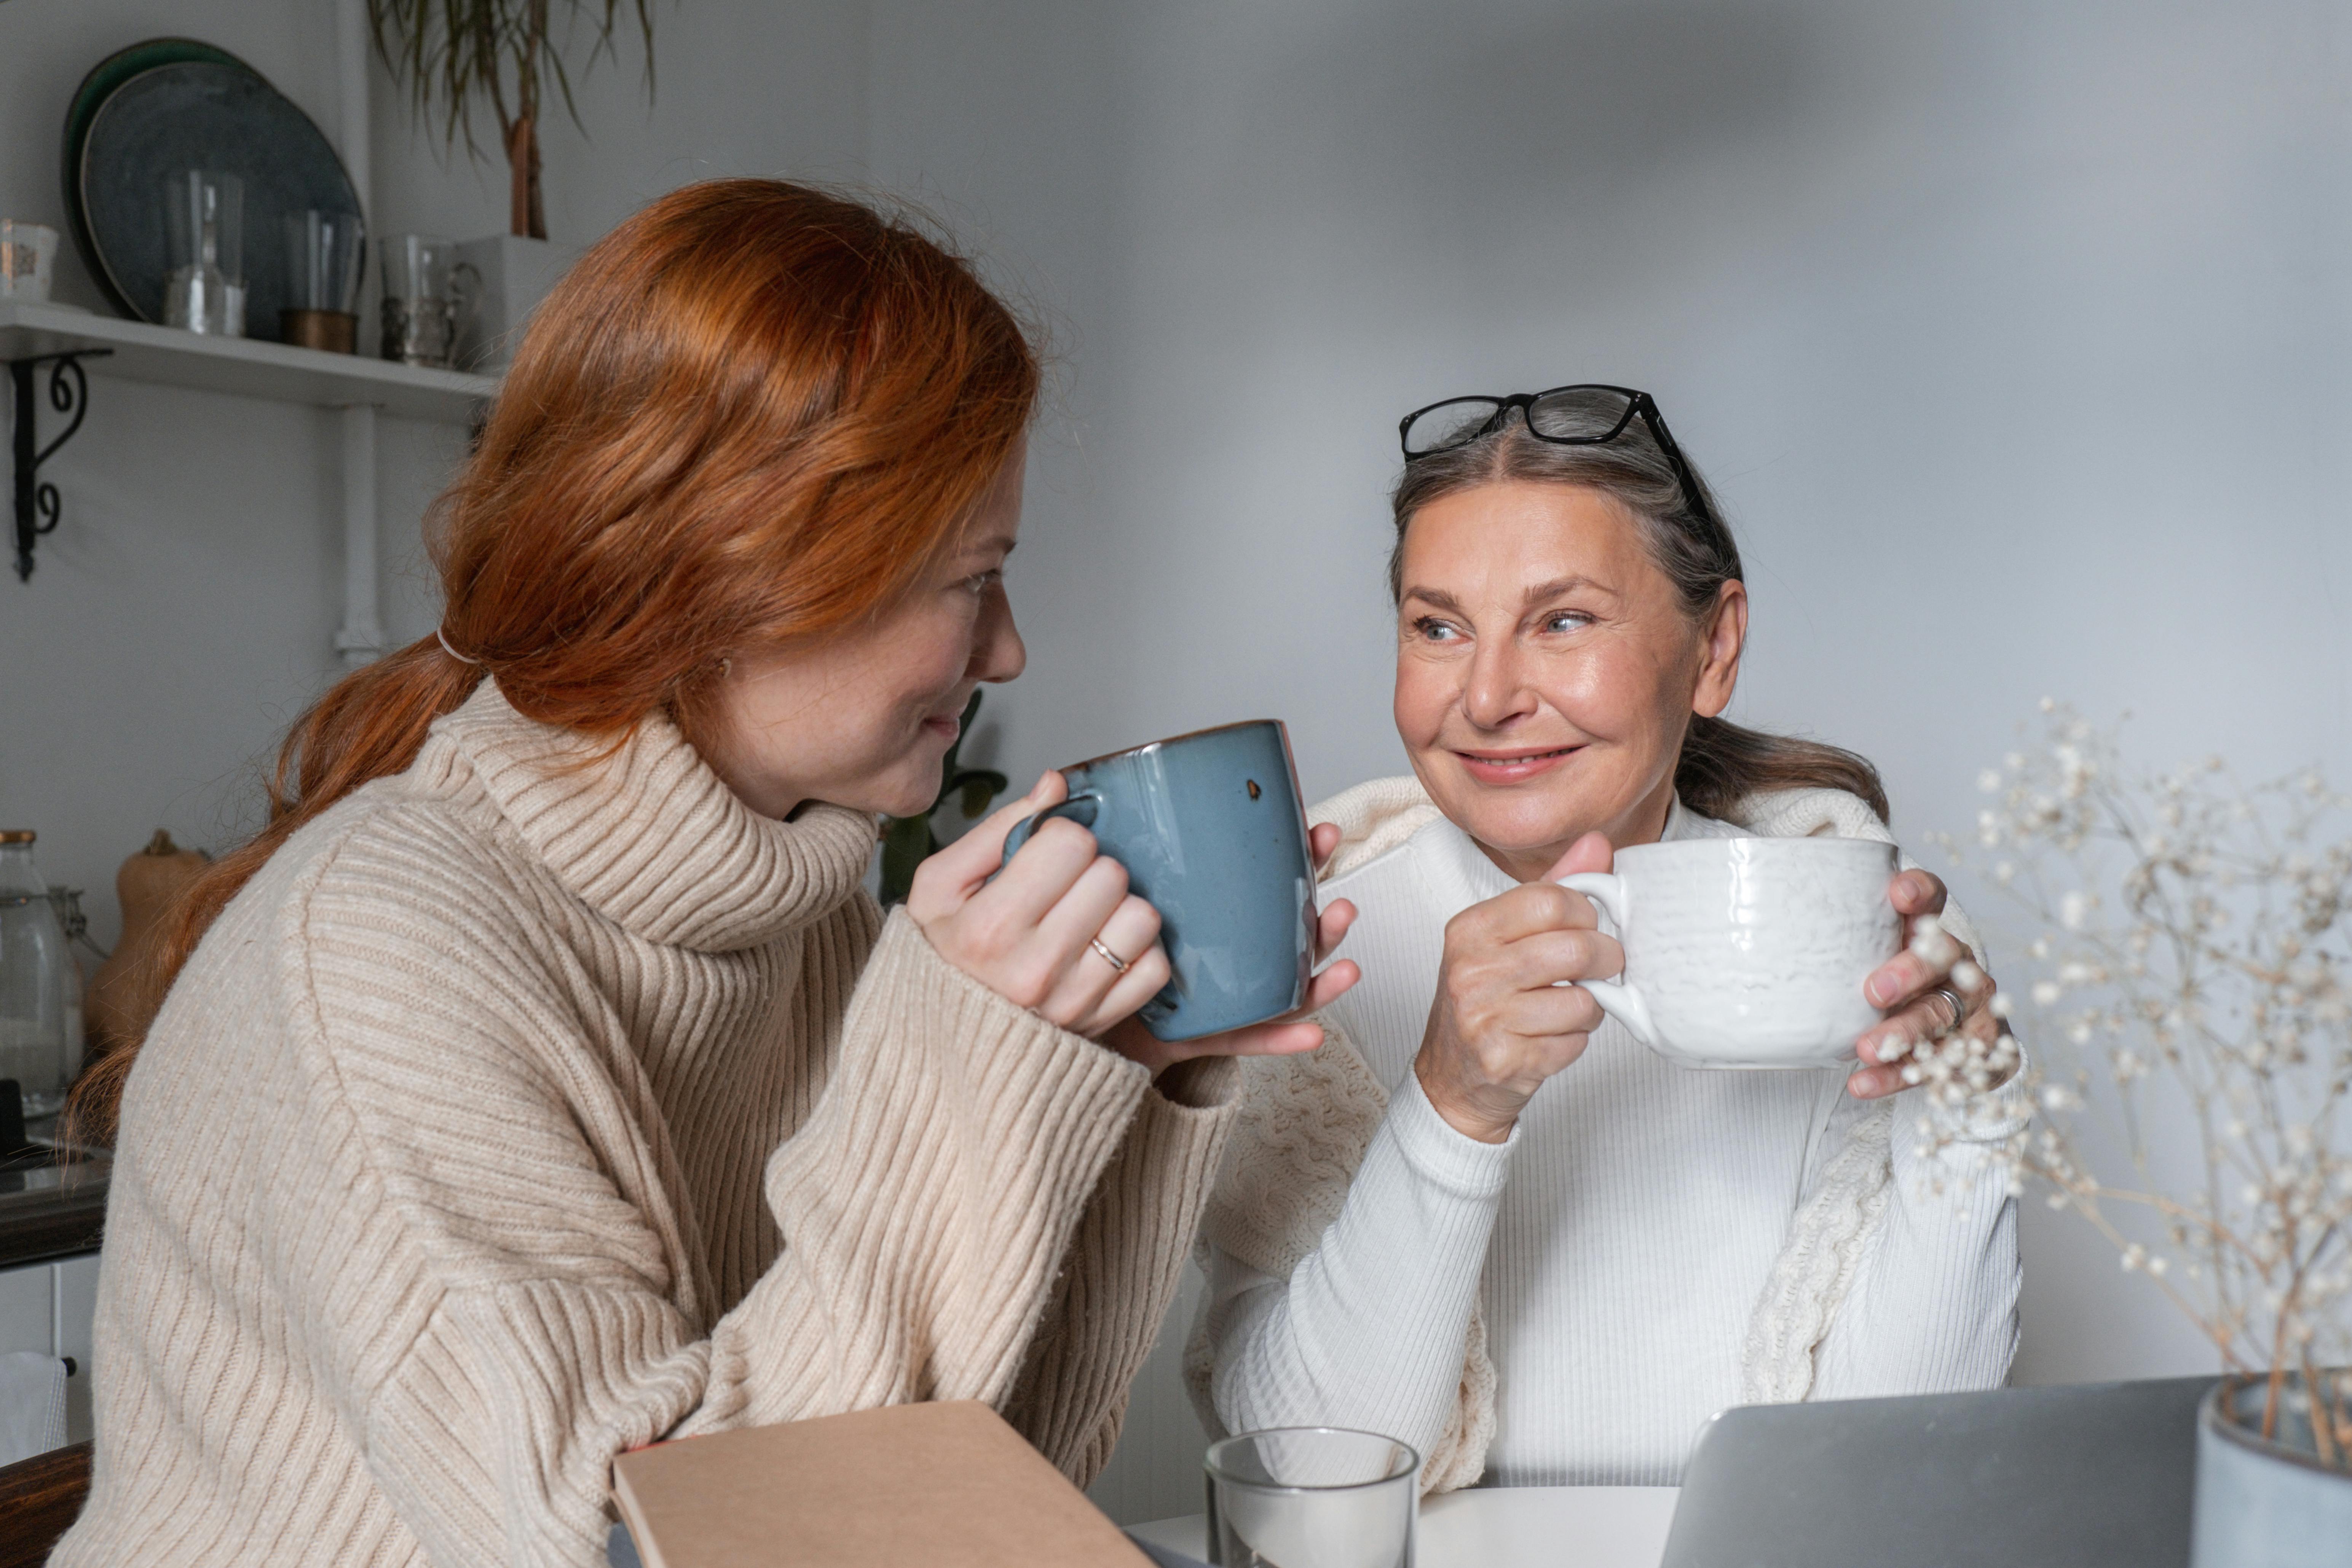 An older woman and a younger one smiling while having a beverage together | Source: Pexels